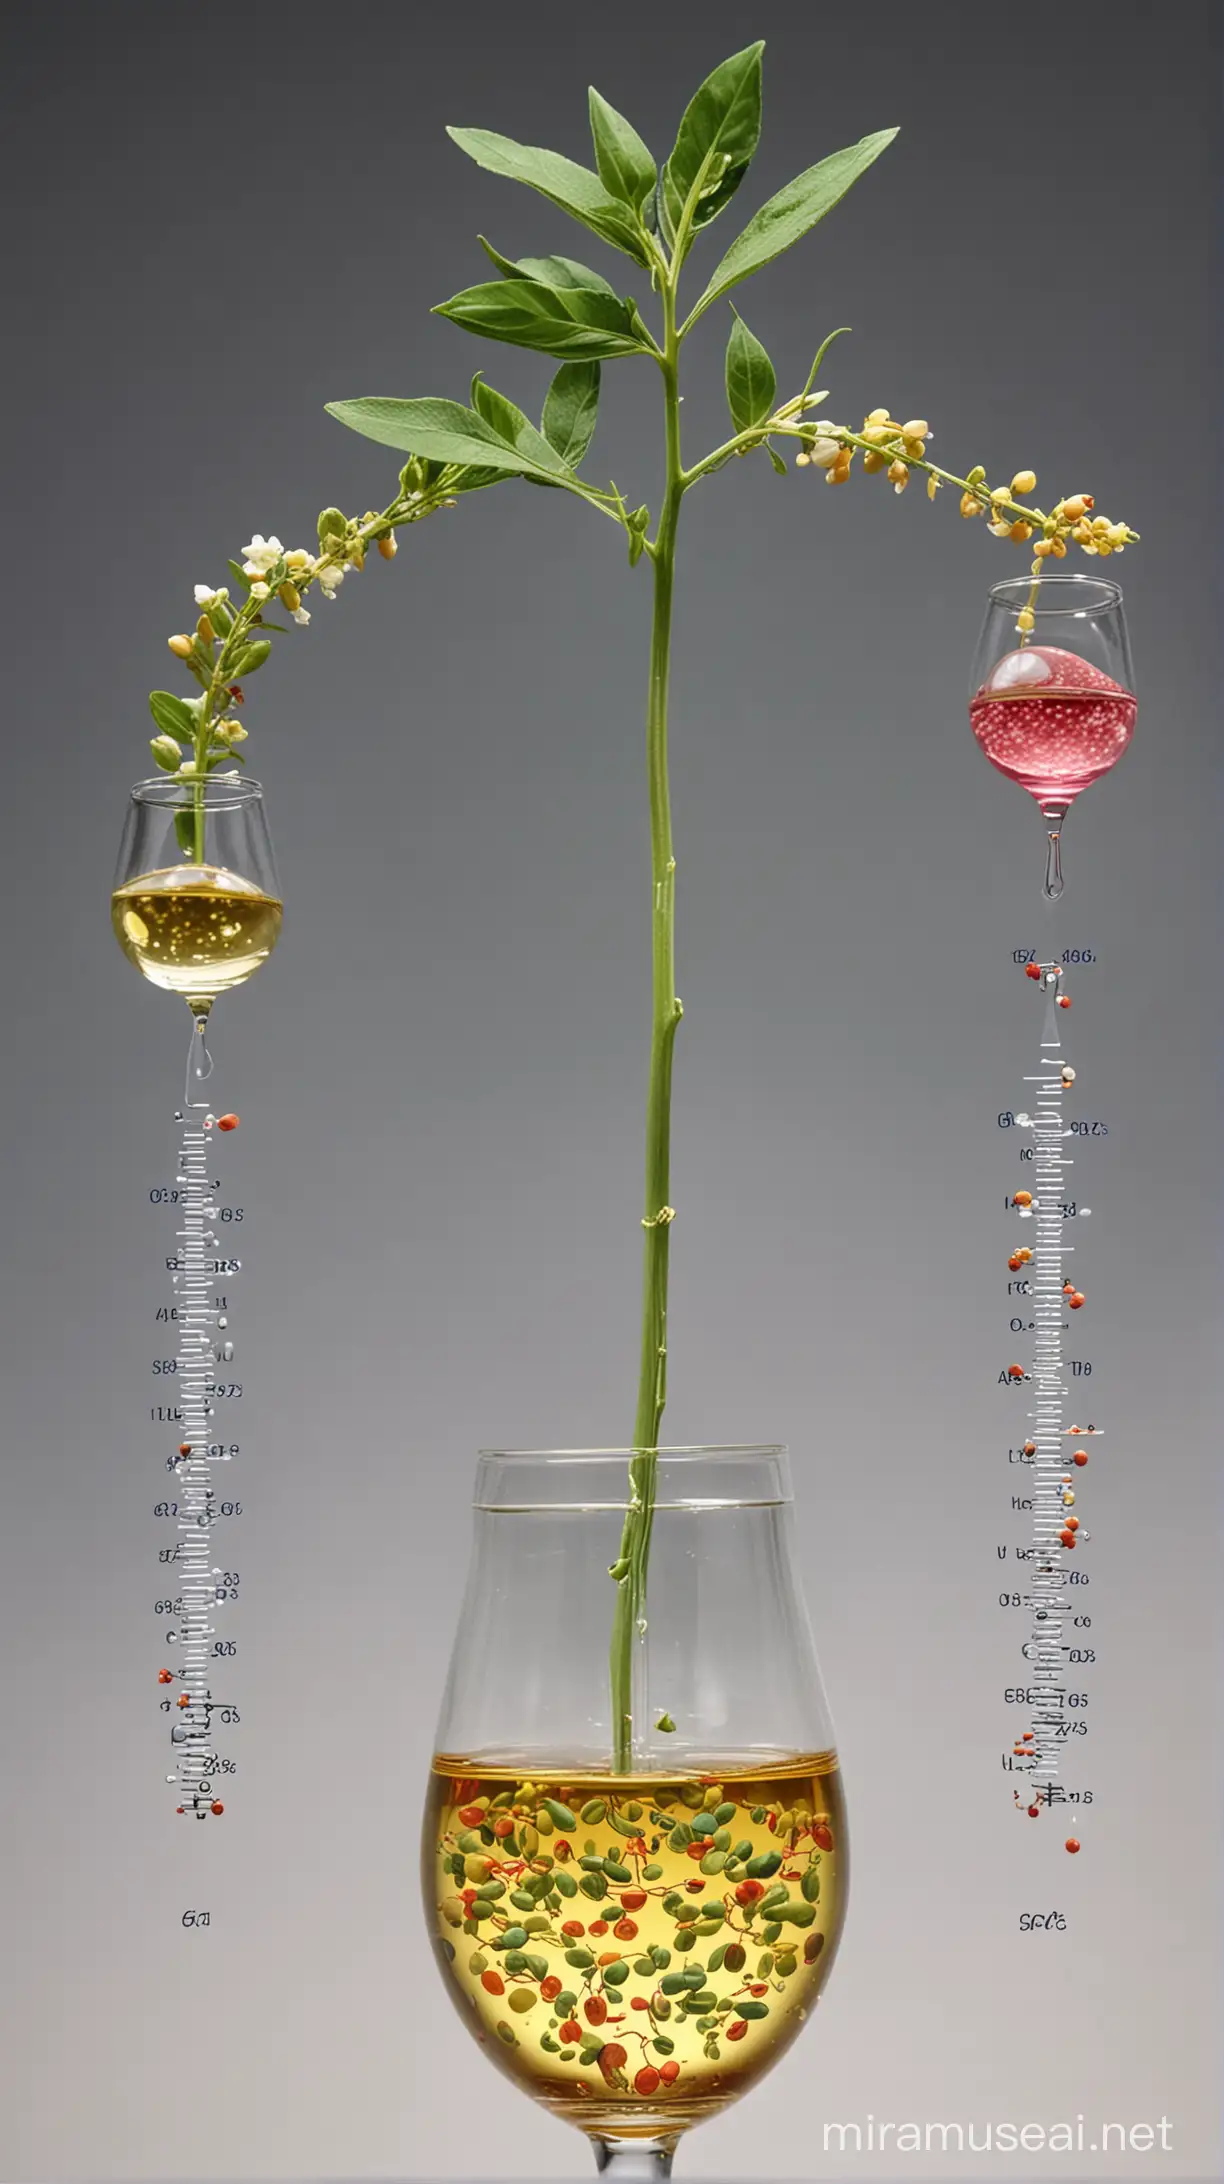 Scene illustrating the stimulating effect of estrogen in women's urine on seed growth: A visual representation from a scientific perspective, showing how estrogen molecules in women's urine stimulate seed germination. Chemical reactions and processes occurring at the molecular level are depicted visually.

